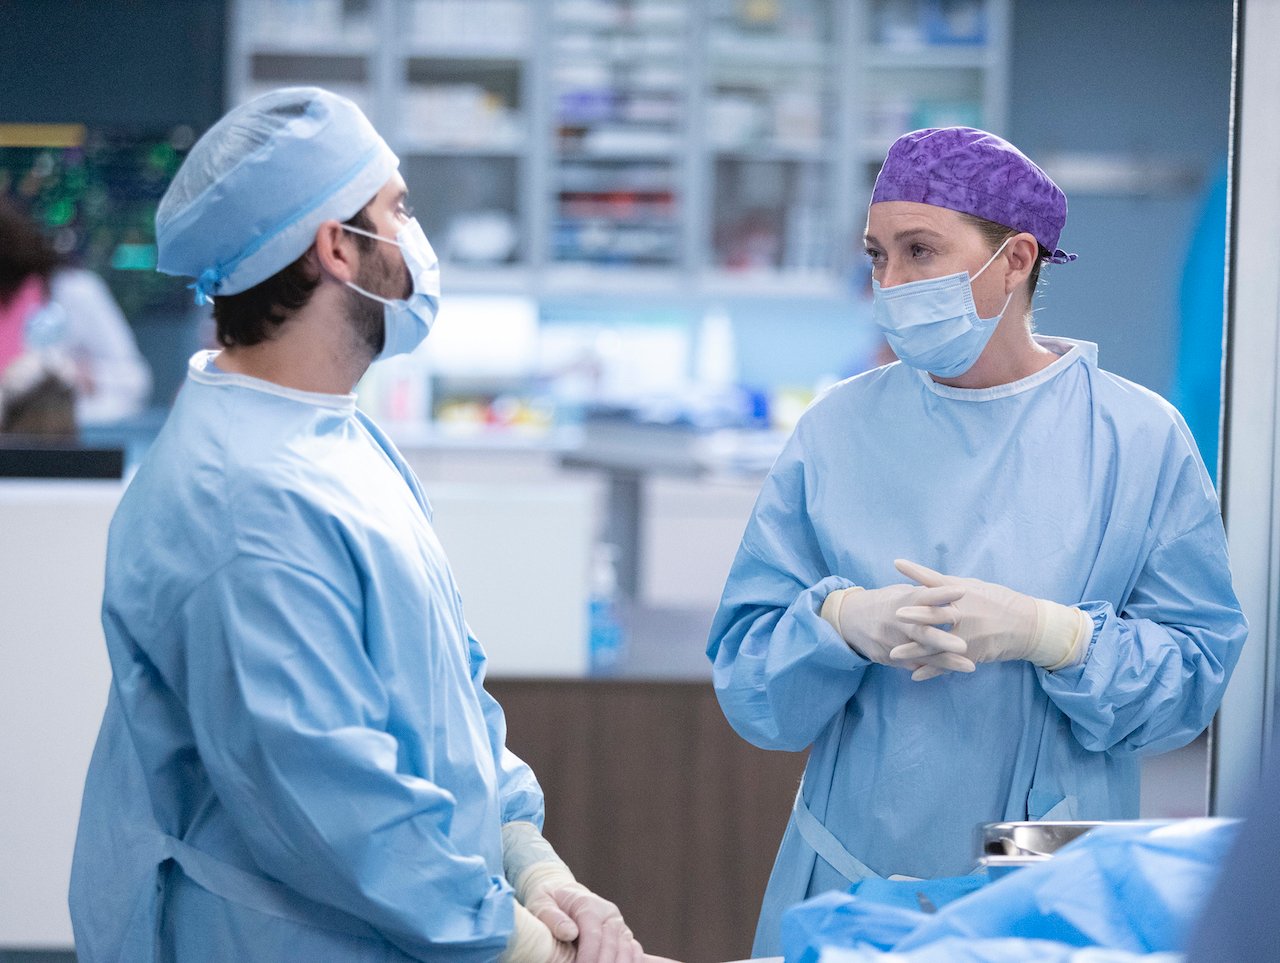 Jake Borelli as Levi Schmitt and Ellen Pompeo as Meredith Grey look at each other in scrubs in 'Grey's Anatomy'.